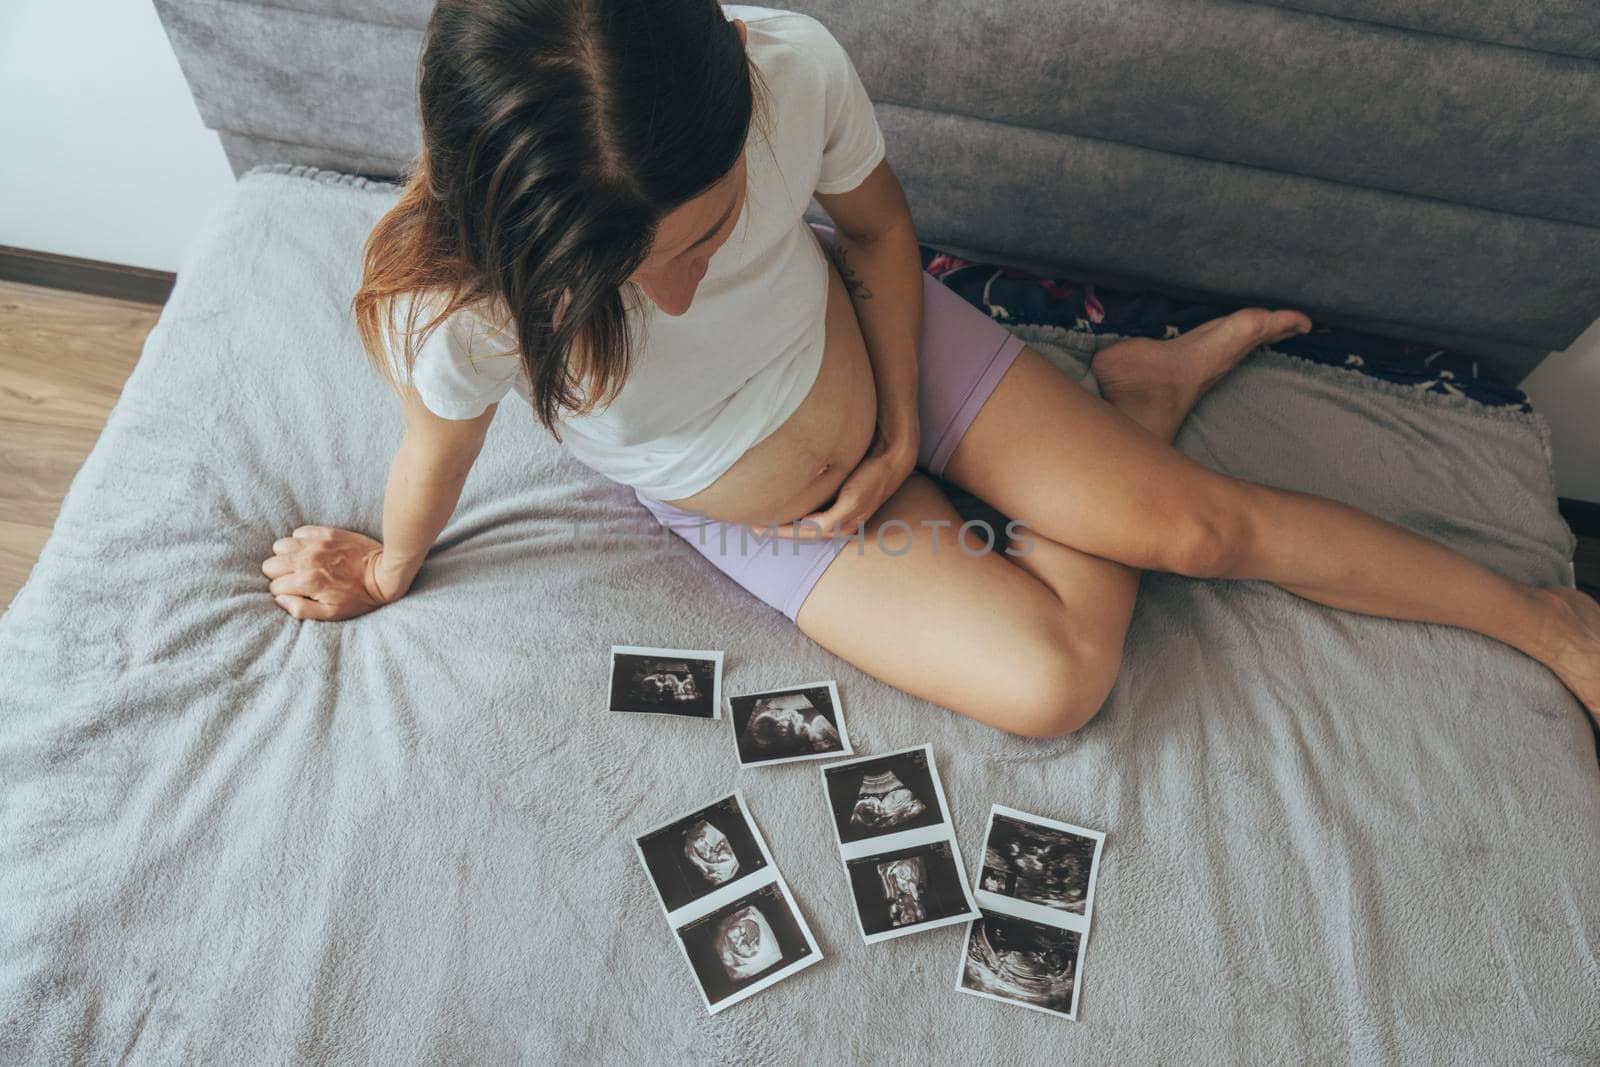 Future mom with ultrasound x ray photos of the baby in tummy. by uveita